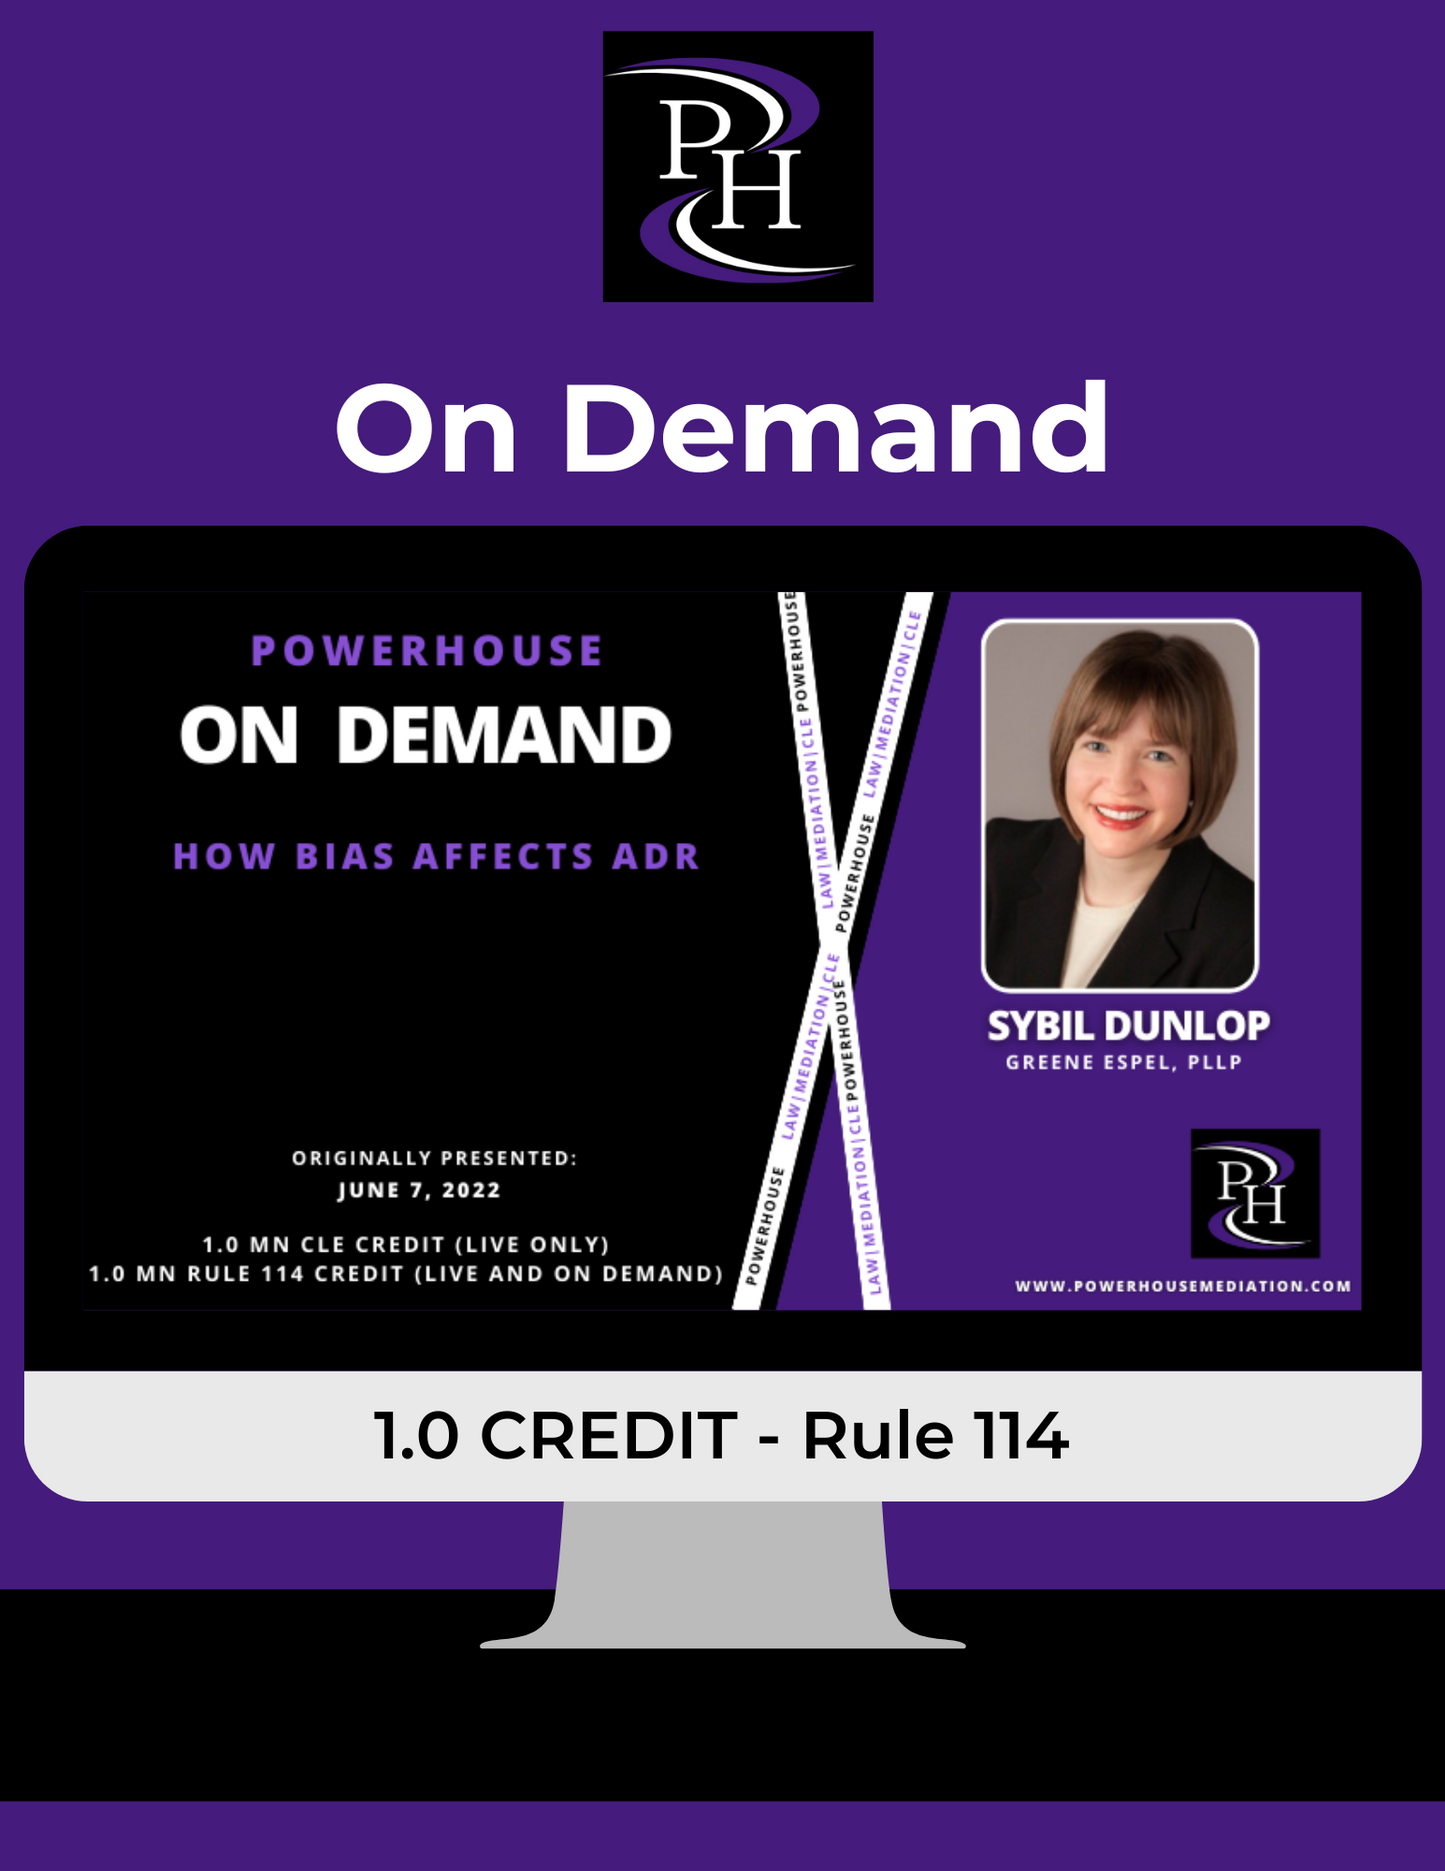 On Demand - How Bias Affects ADR